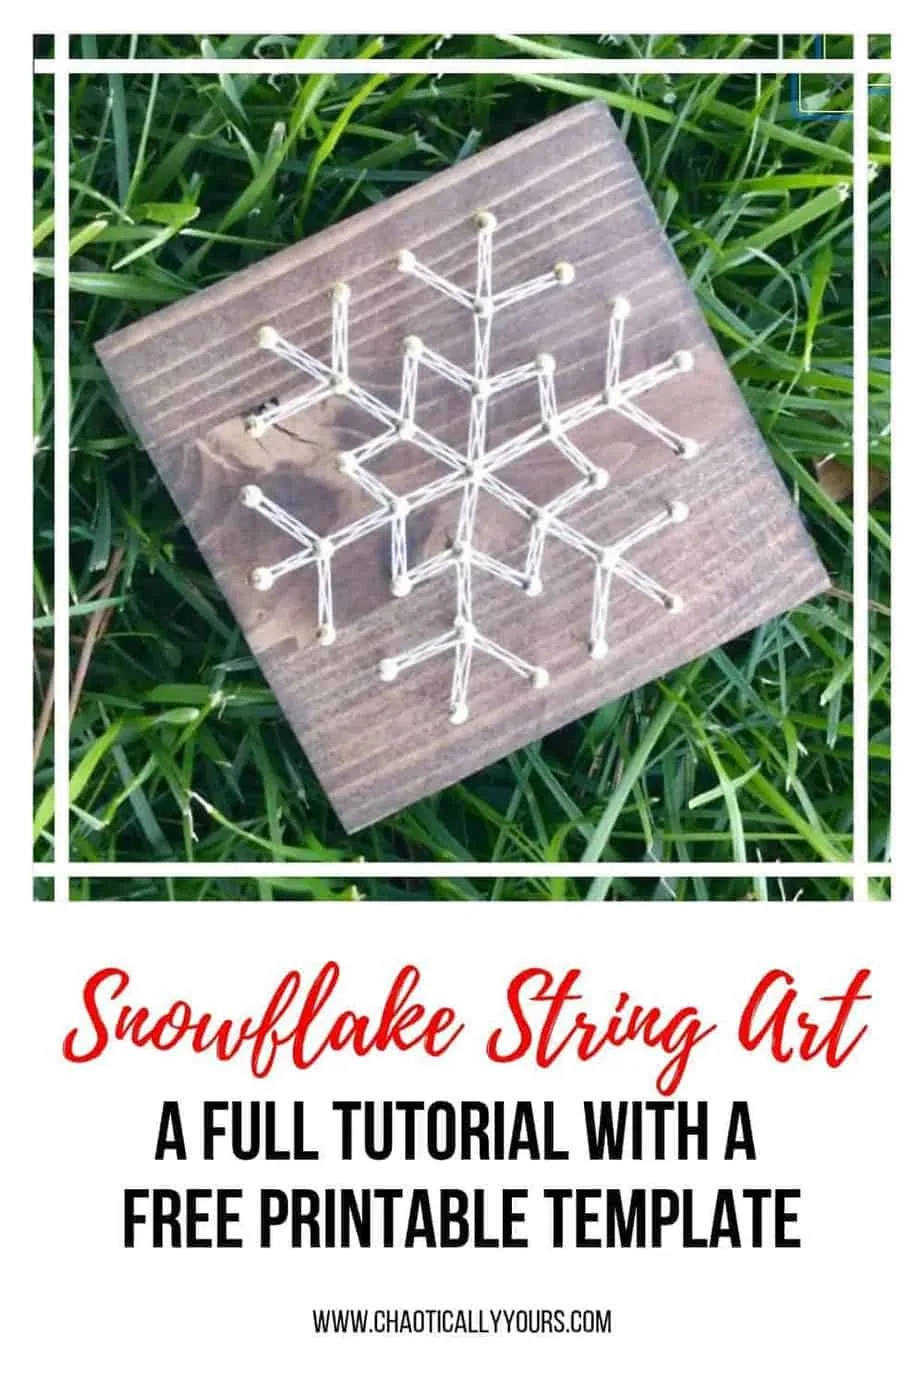 Simple snow flake string art tutorial with free printable template